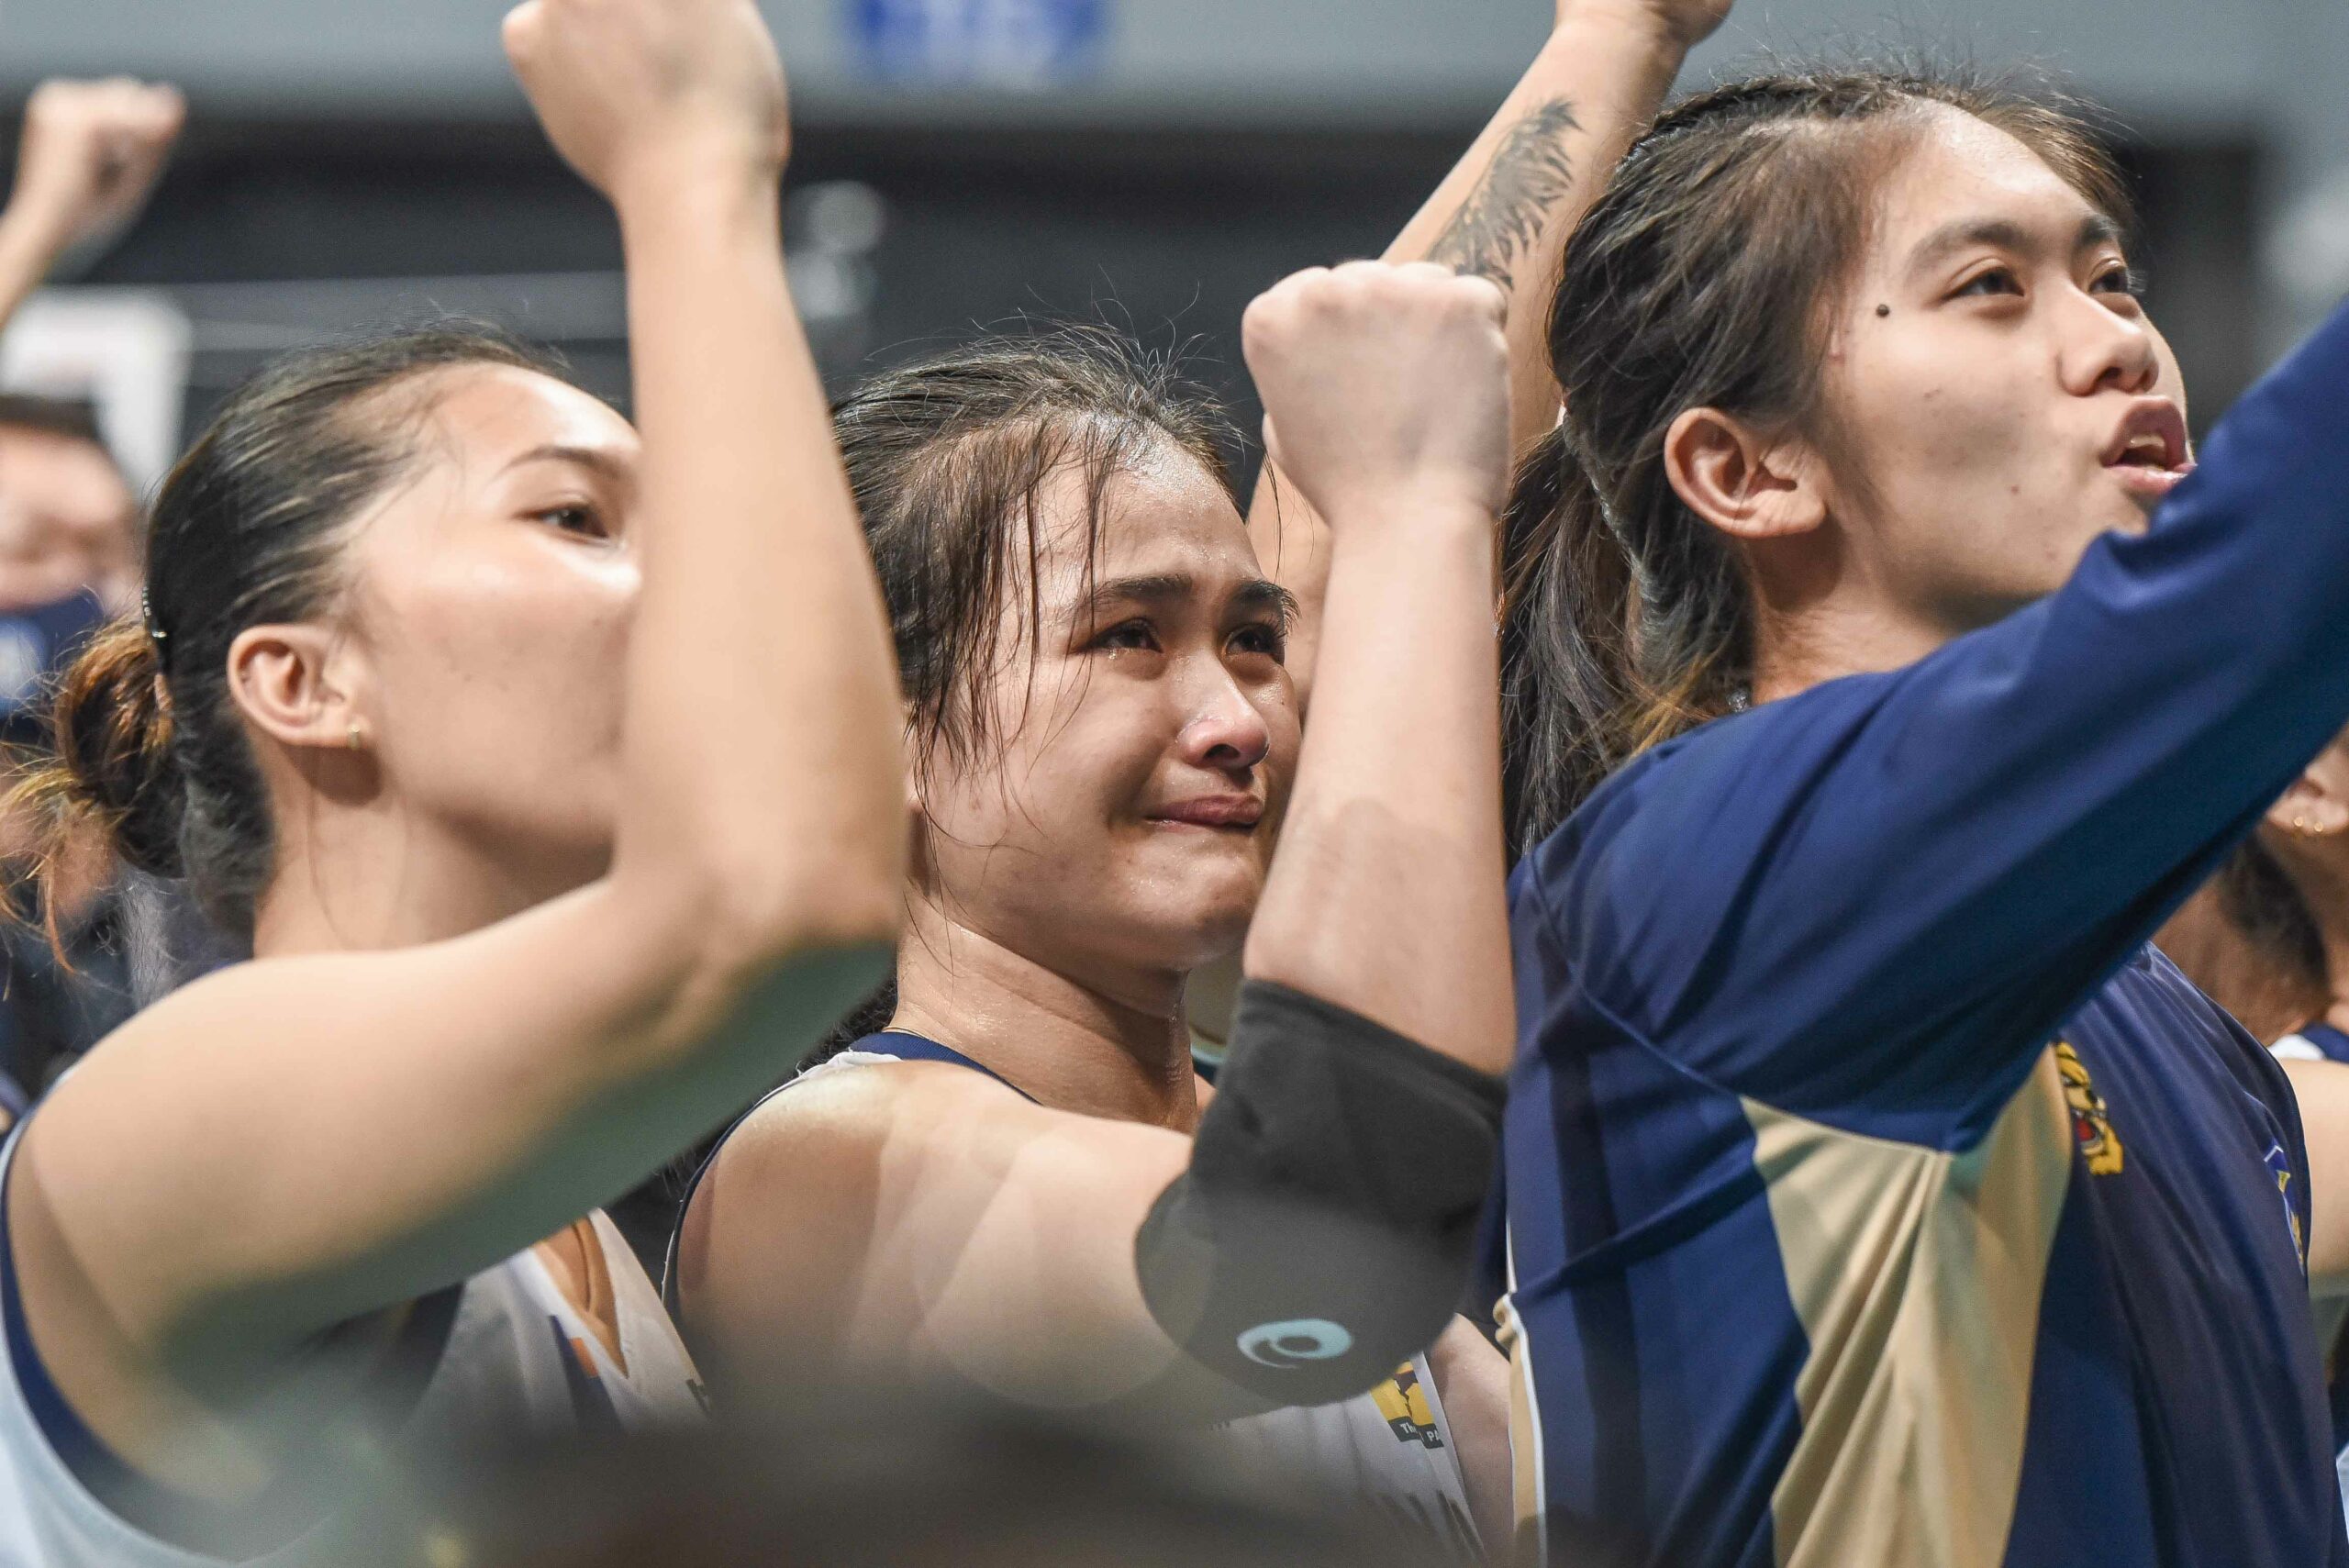 UAAP-Season-84-Womens-Volleyball-NU-vs-UST-Michaela-Belen-1-2-scaled Killer smile takes on new meaning with Rookie MVP Belen News NU UAAP Volleyball  - philippine sports news